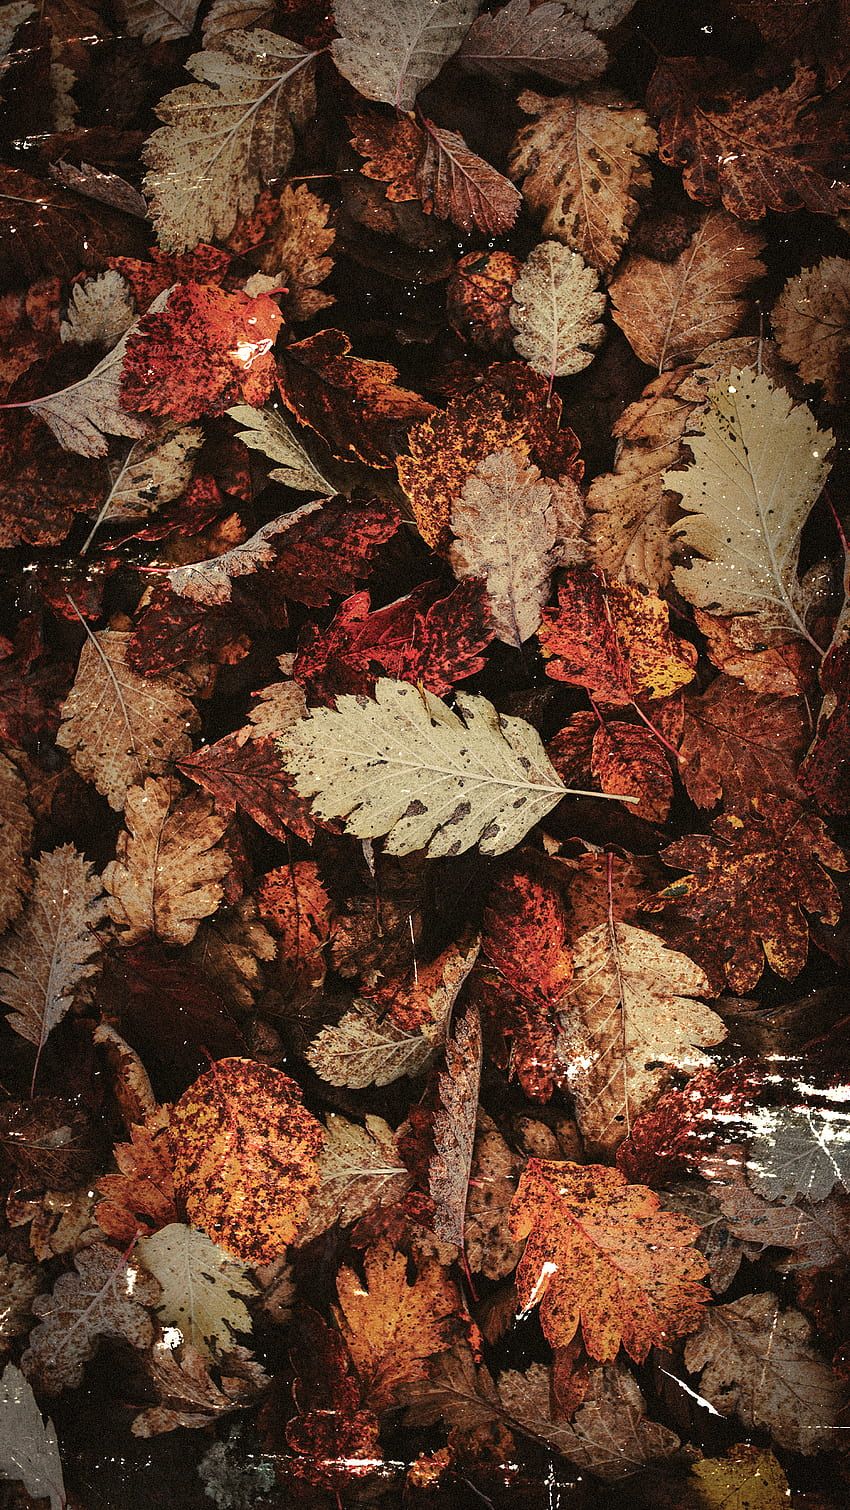 A pile of autumn leaves in different shades of brown and orange. - Vintage fall